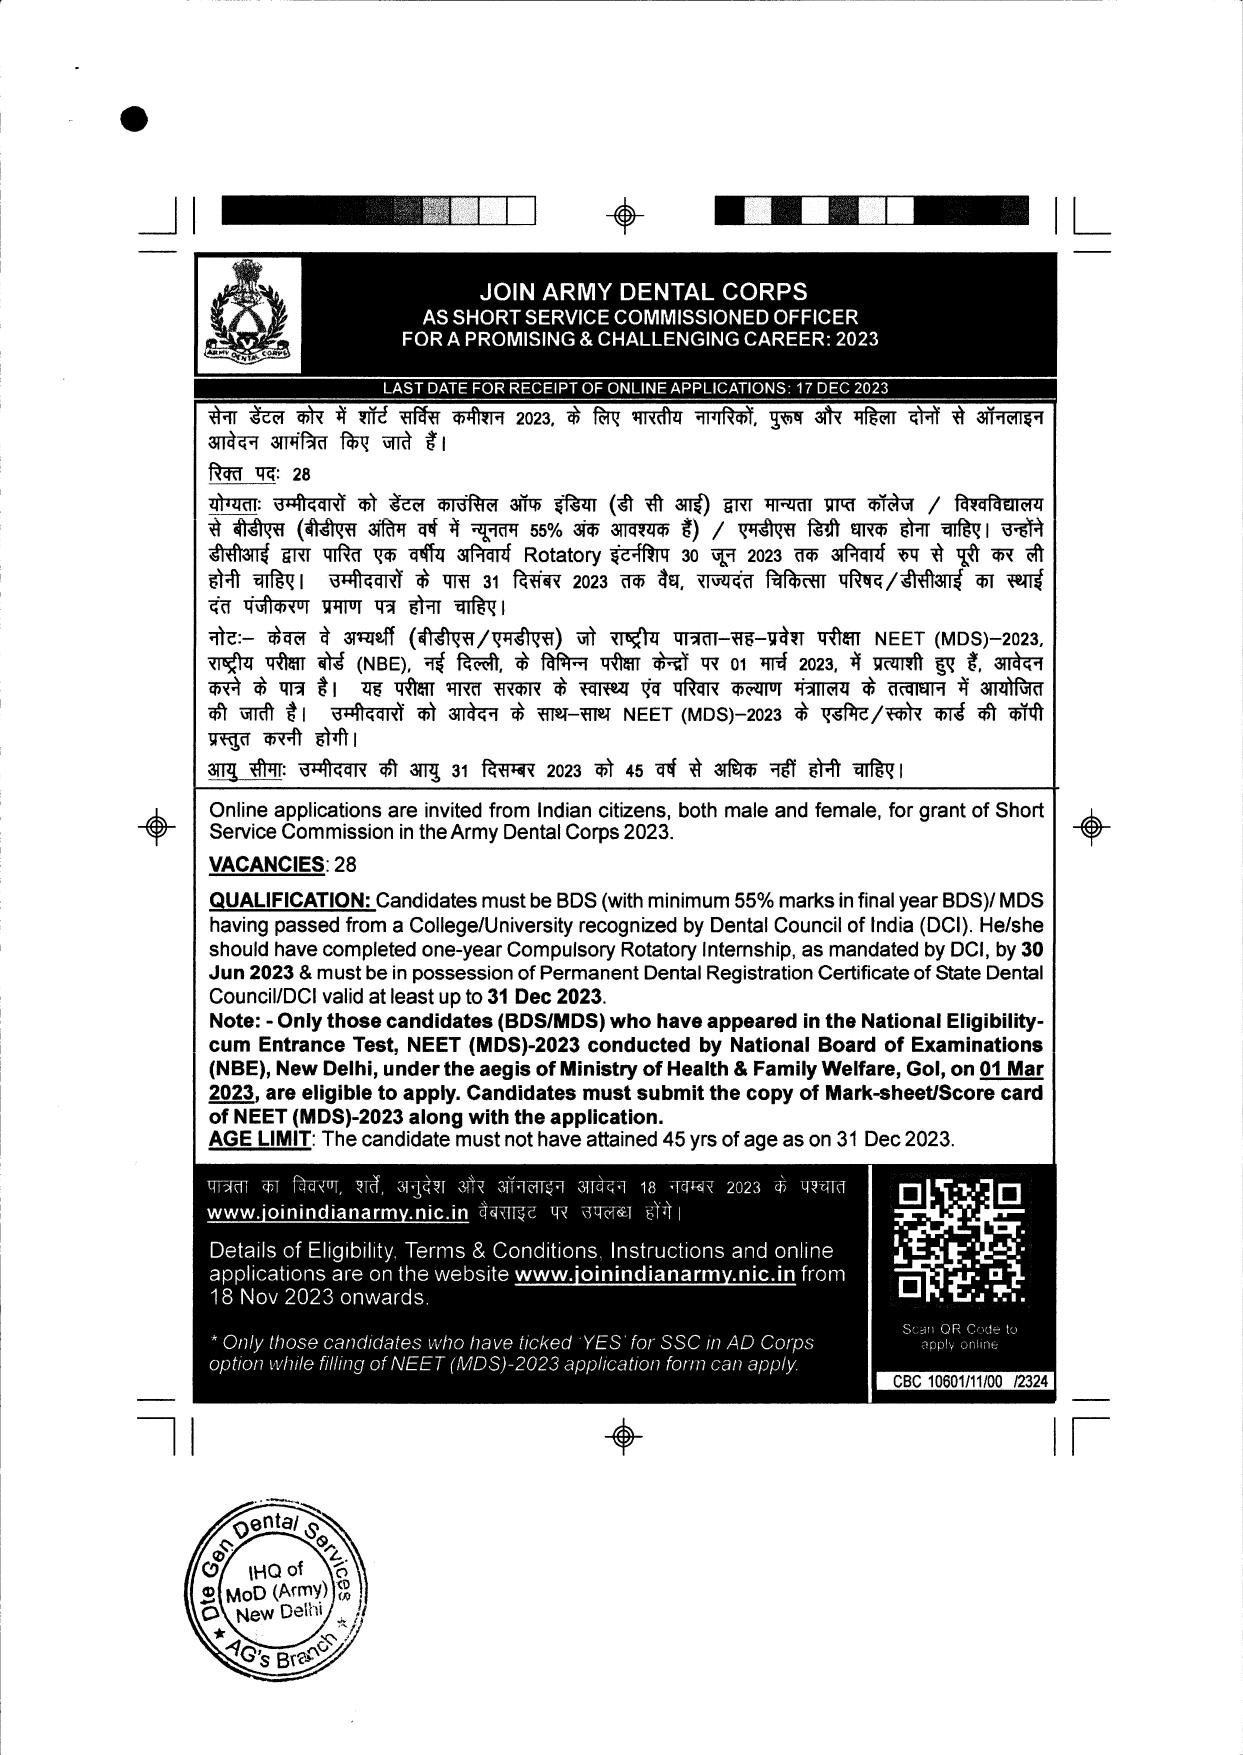 Indian Army Short Service Commissioned Officer (SSC Officer) Recruitment 2023 - Page 1